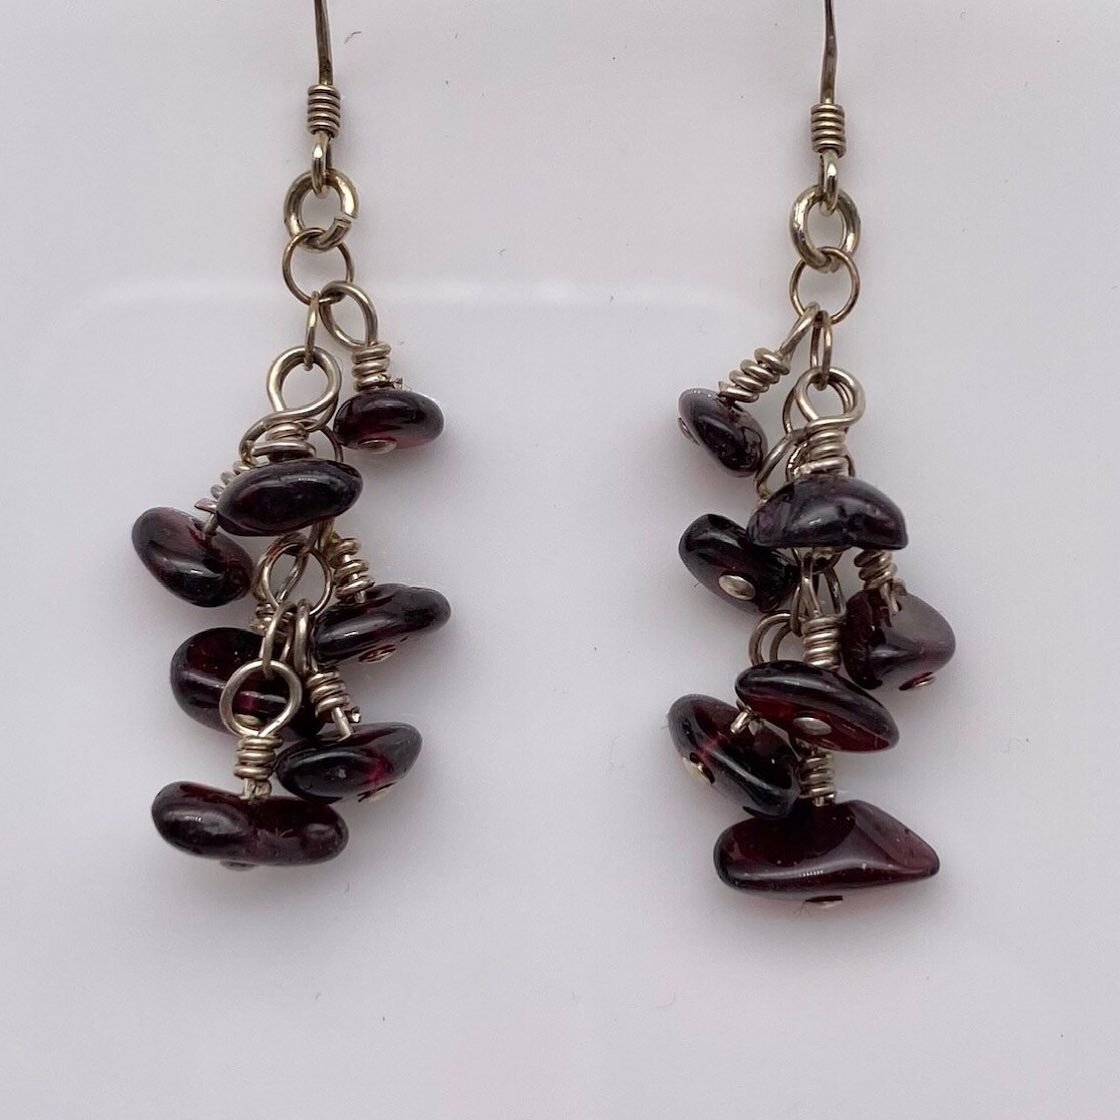 Believed to resemble the seeds of a pomegranate, which are symbolic of life and power, this January birthstone is often thought to promote good health.

Measuring approximately 1.5&rdquo; long, these sterling silver earrings sport 7 Garnet chips  mea